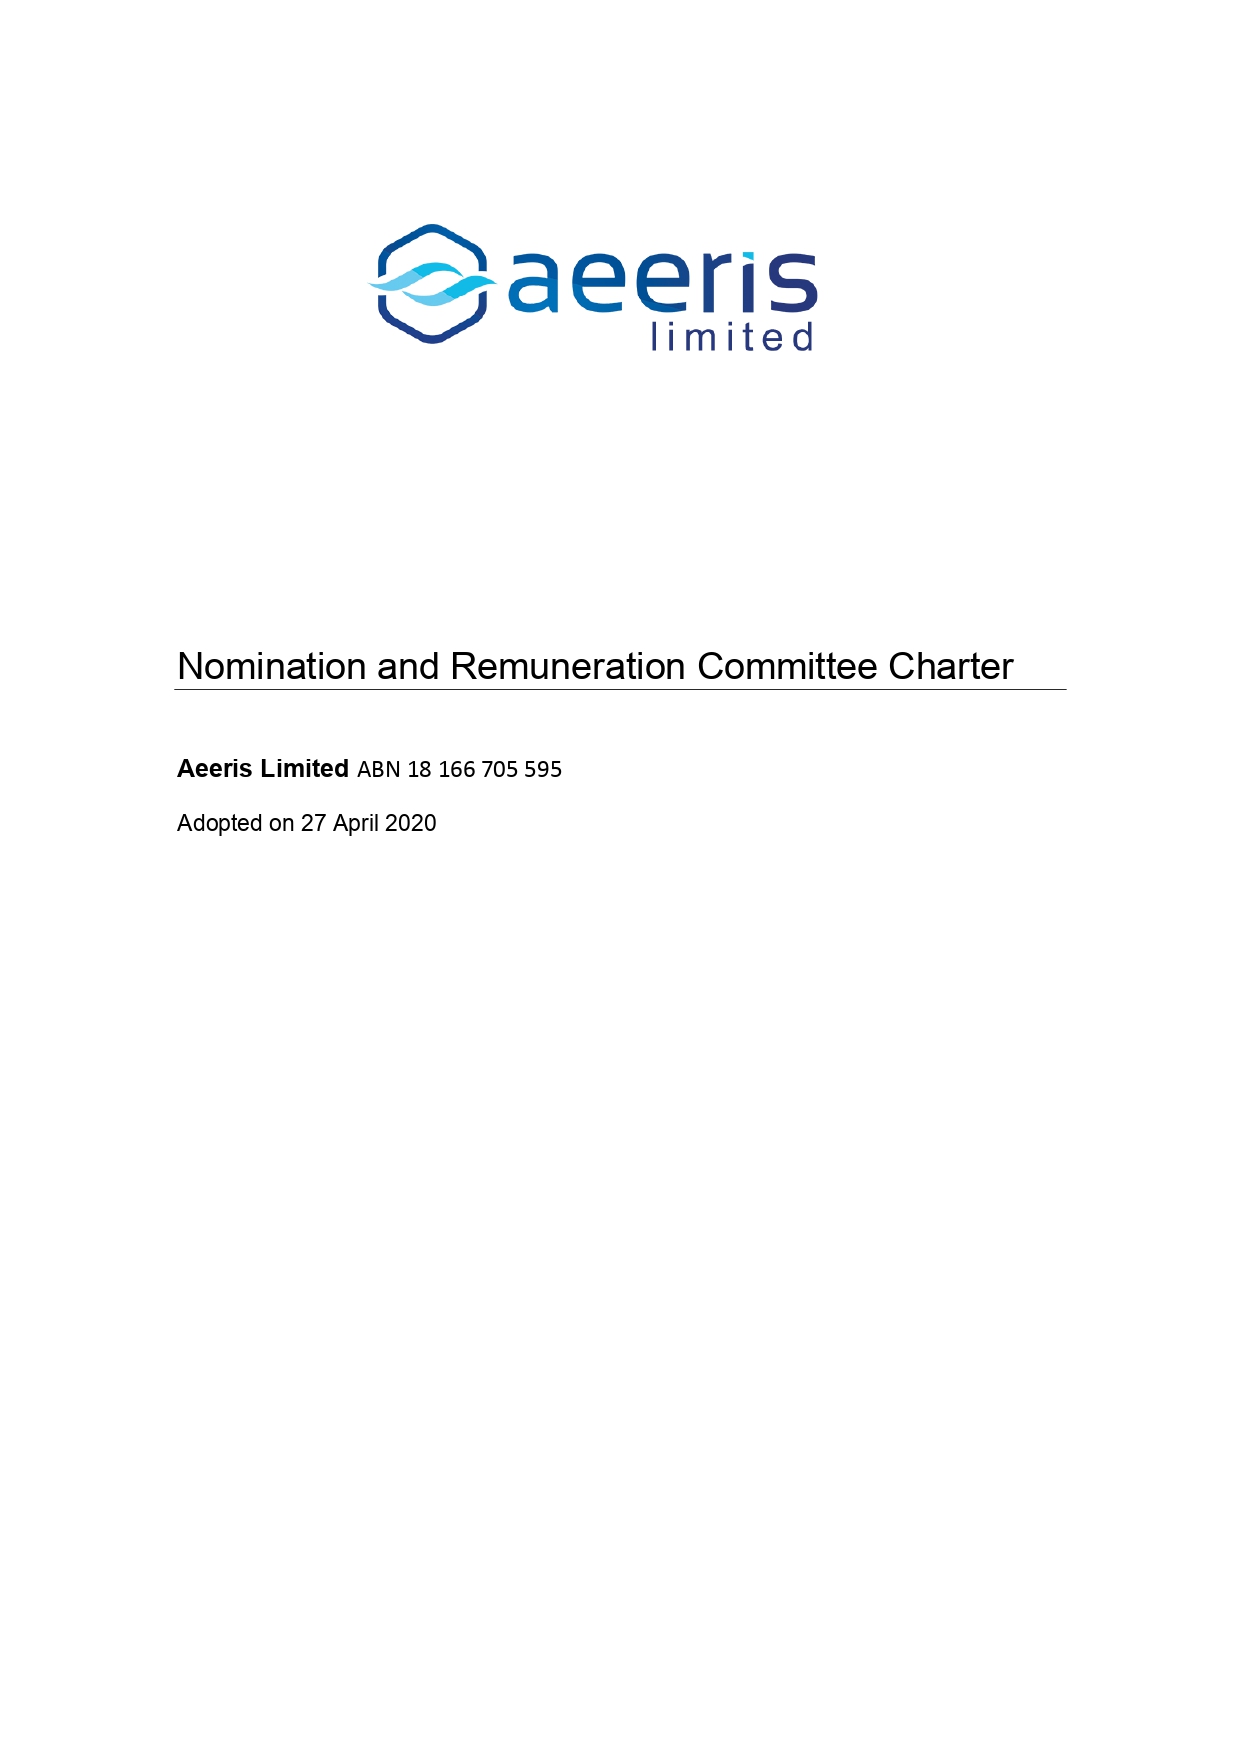 AER Nomination and Remuneration Committee Charter